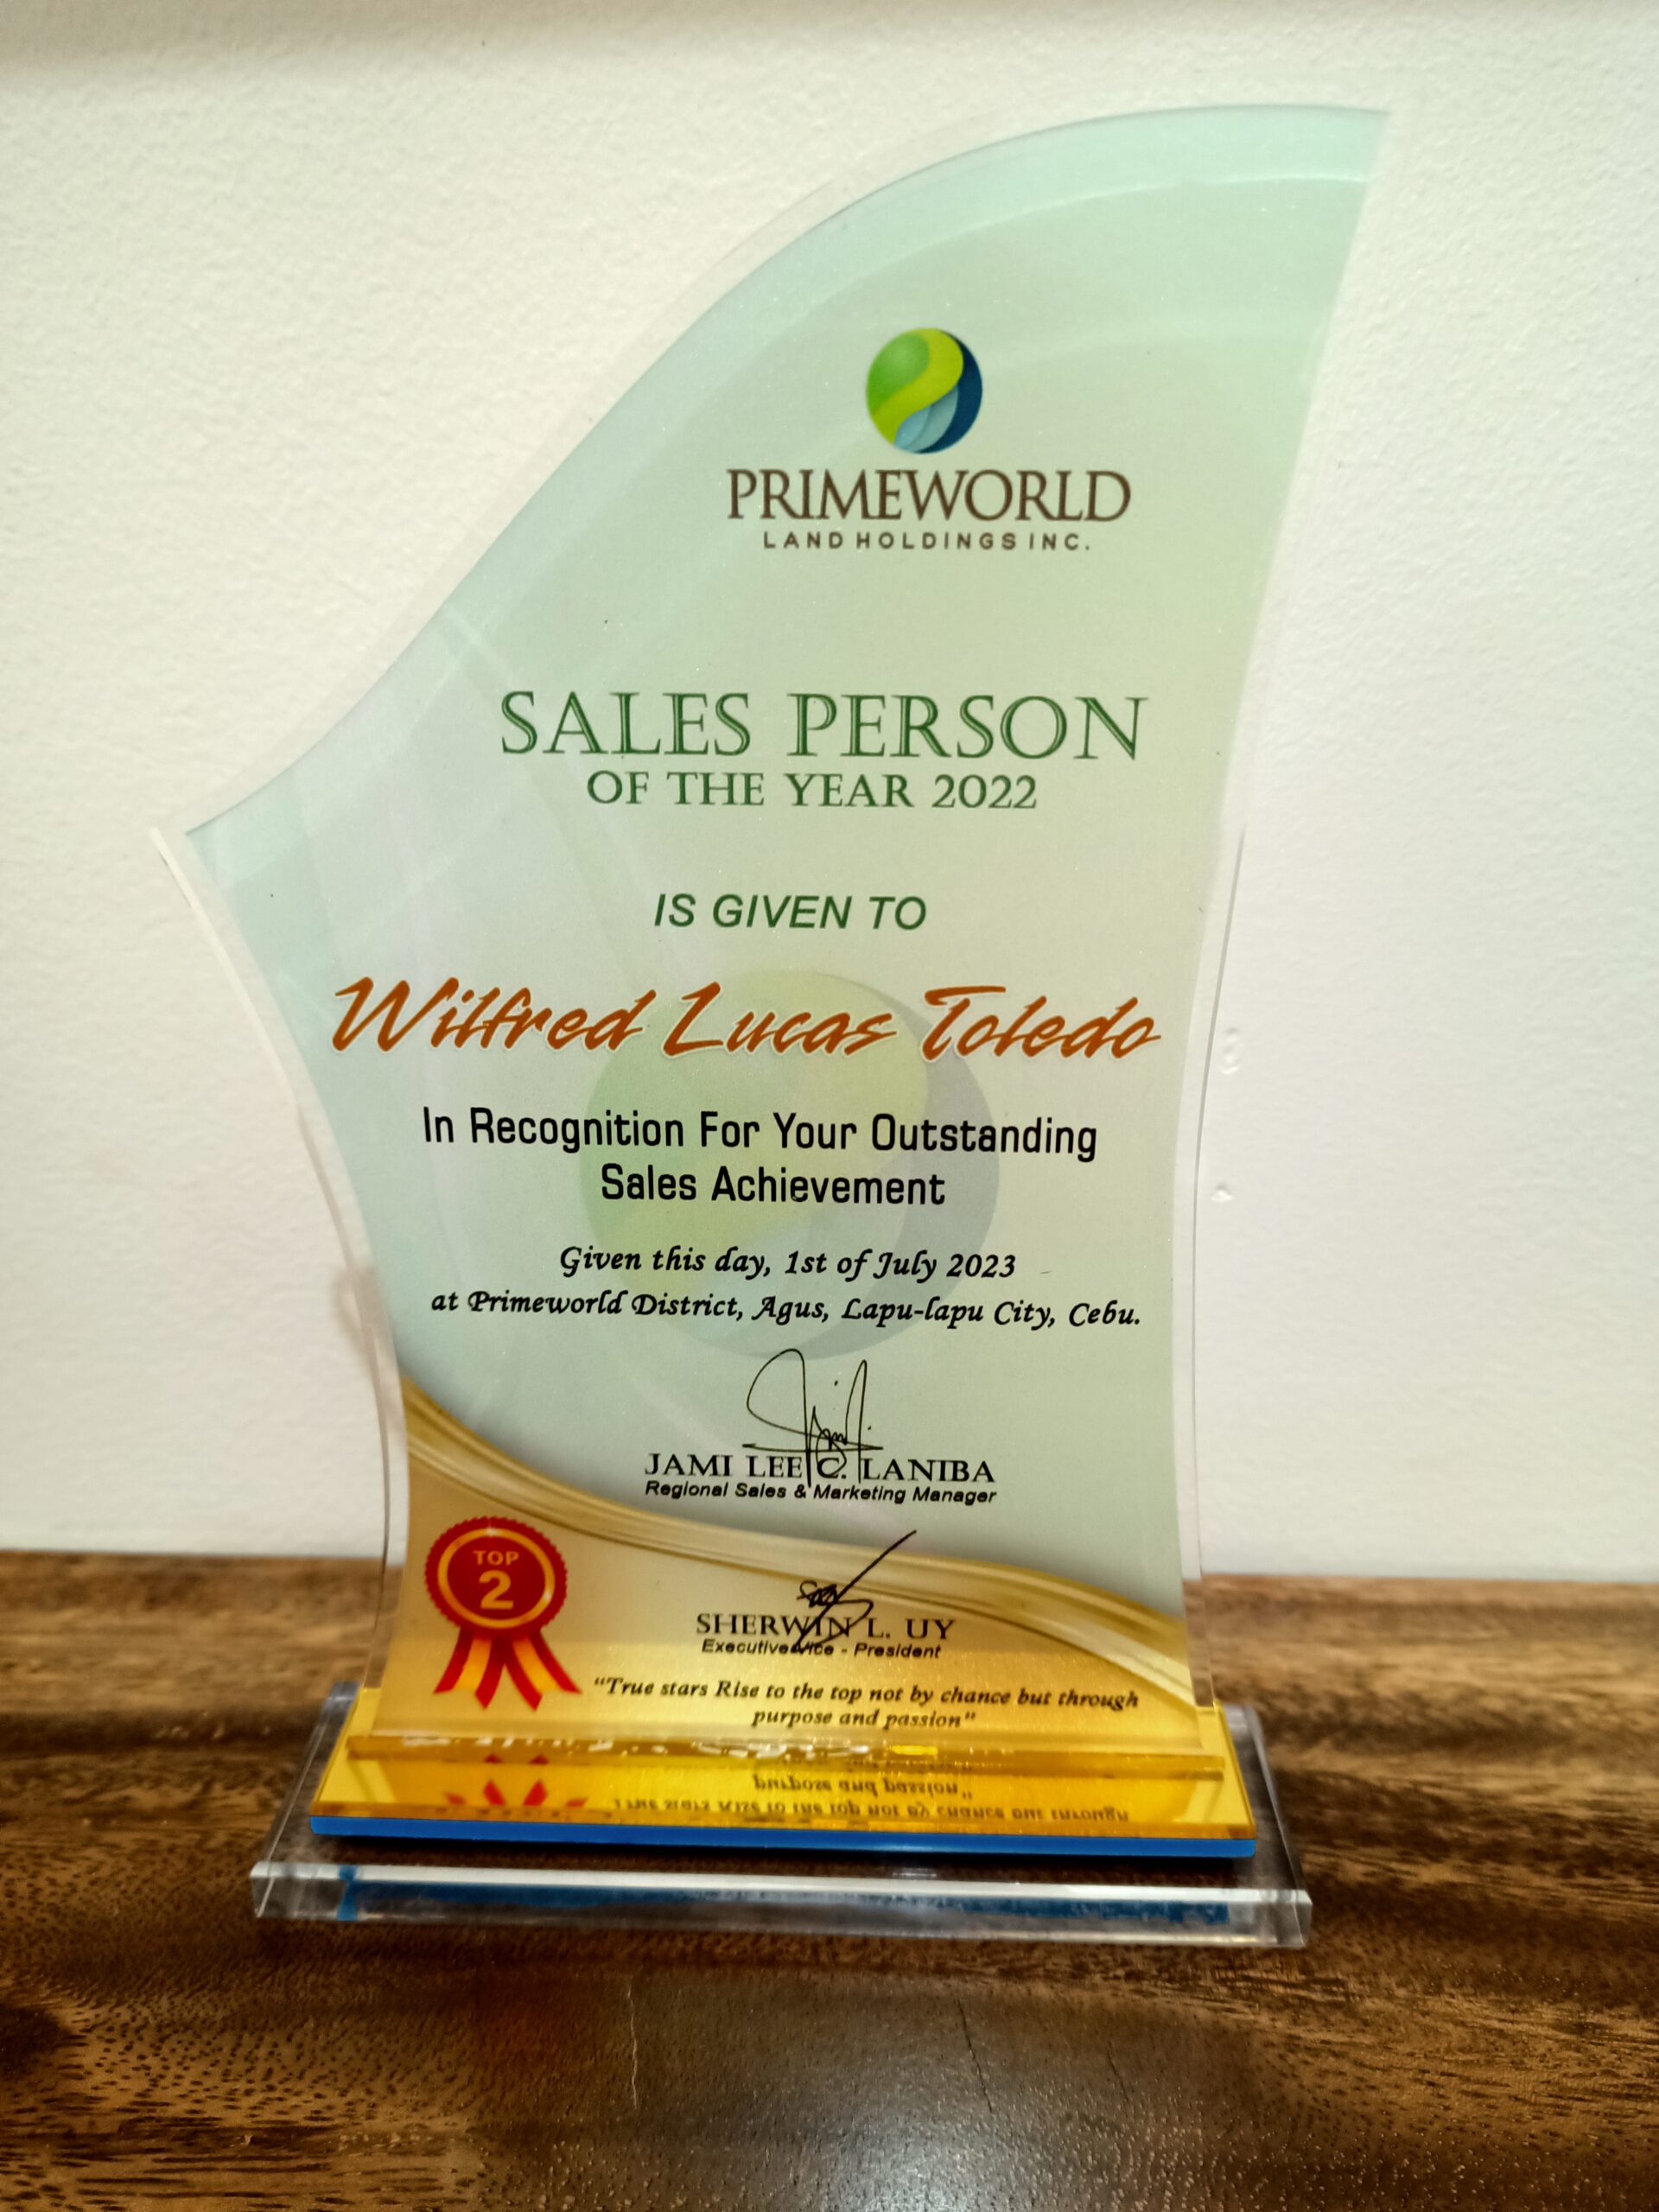 AWARDS & RECOGNITION GIVEN BY PRIMEWORLD POINTE